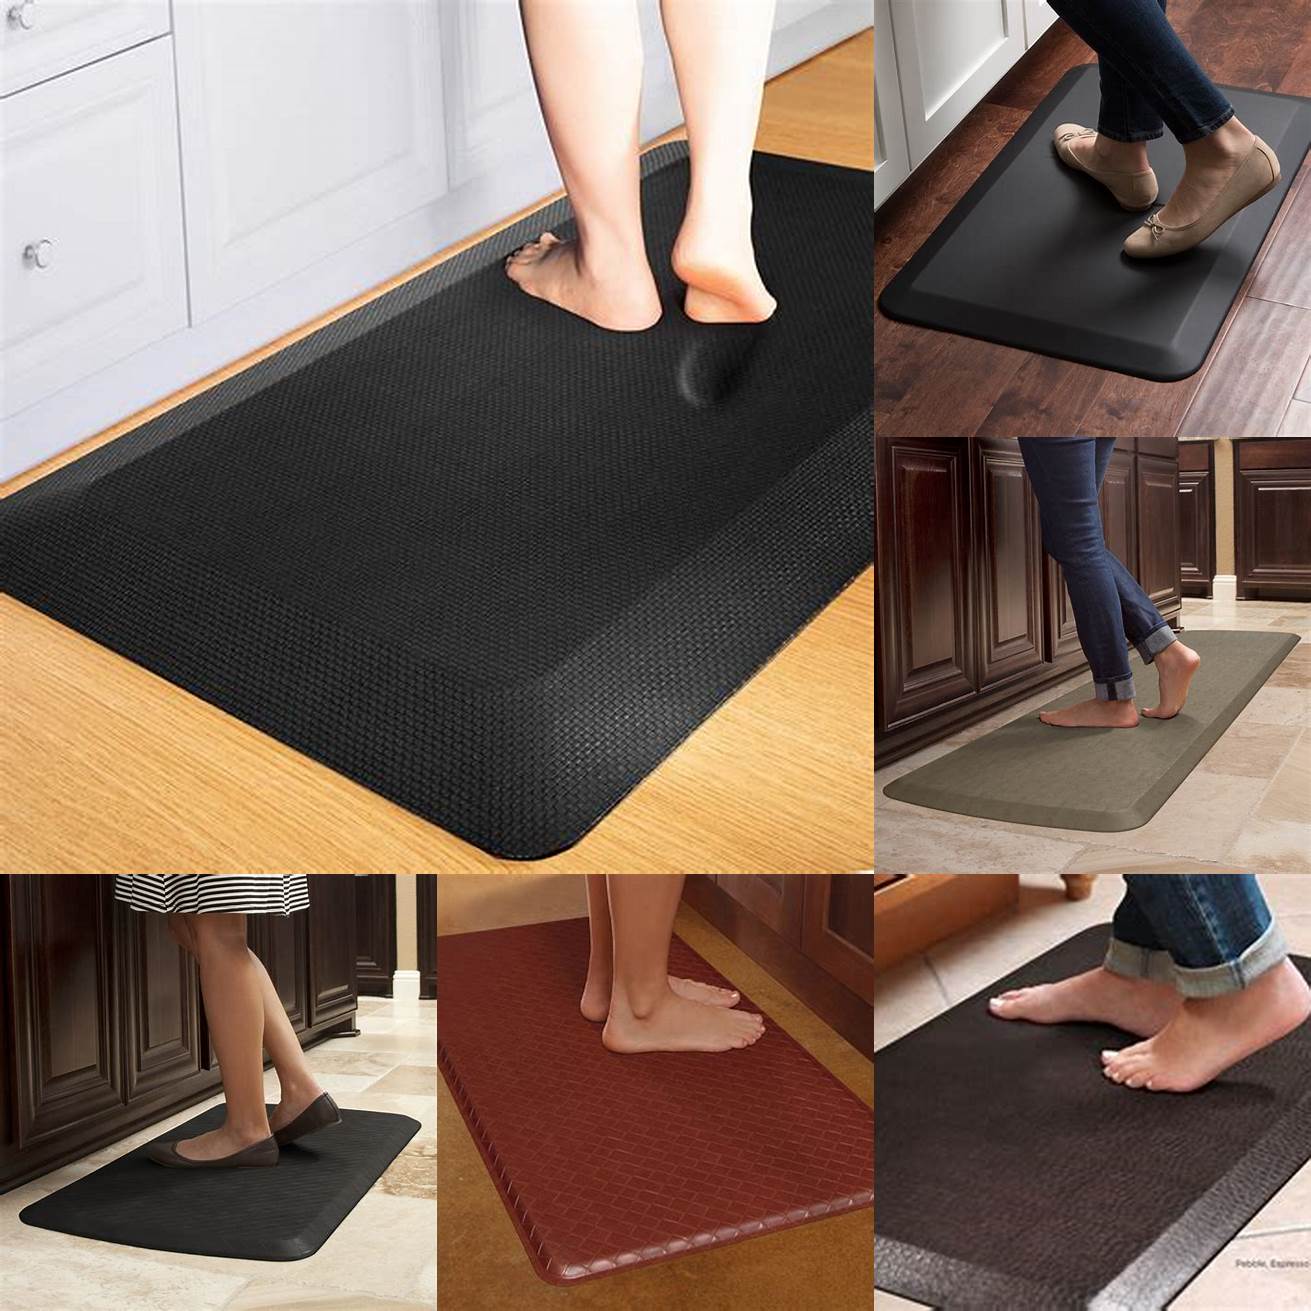 Gel mats - Gel mats are cushioned and provide excellent comfort and support They are ideal for those who stand for long periods